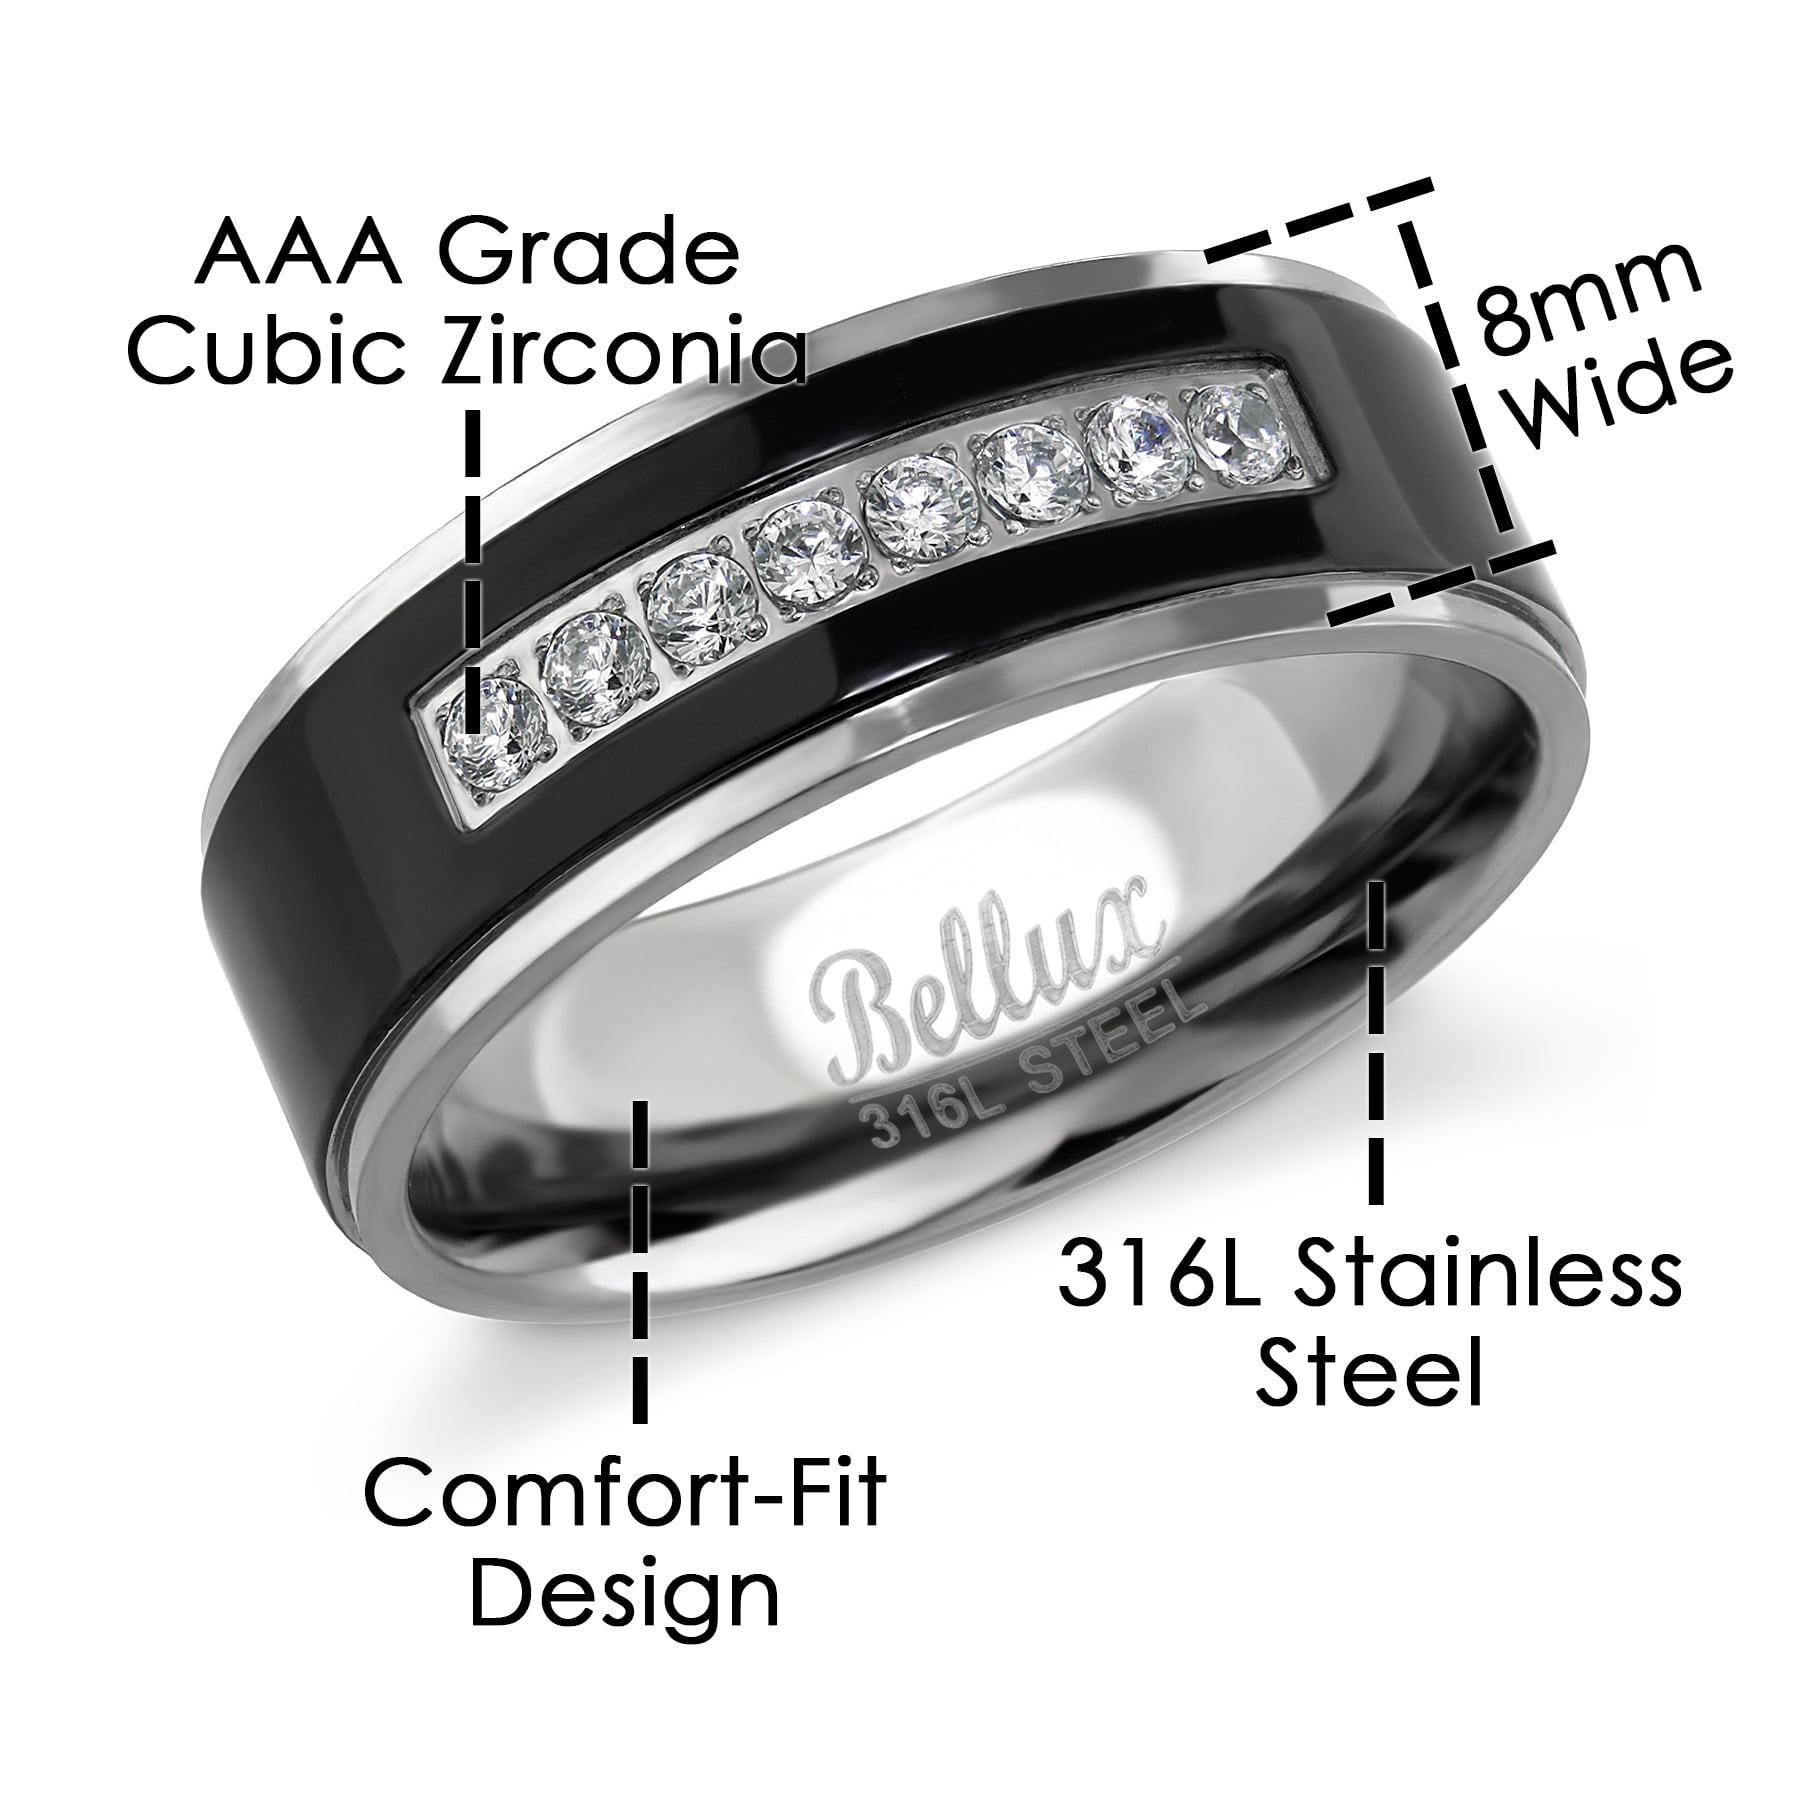 AMDXD Jewelry Stainless Steel Wedding Band Men Wedding Ring Anniversary Promise Ring Silver